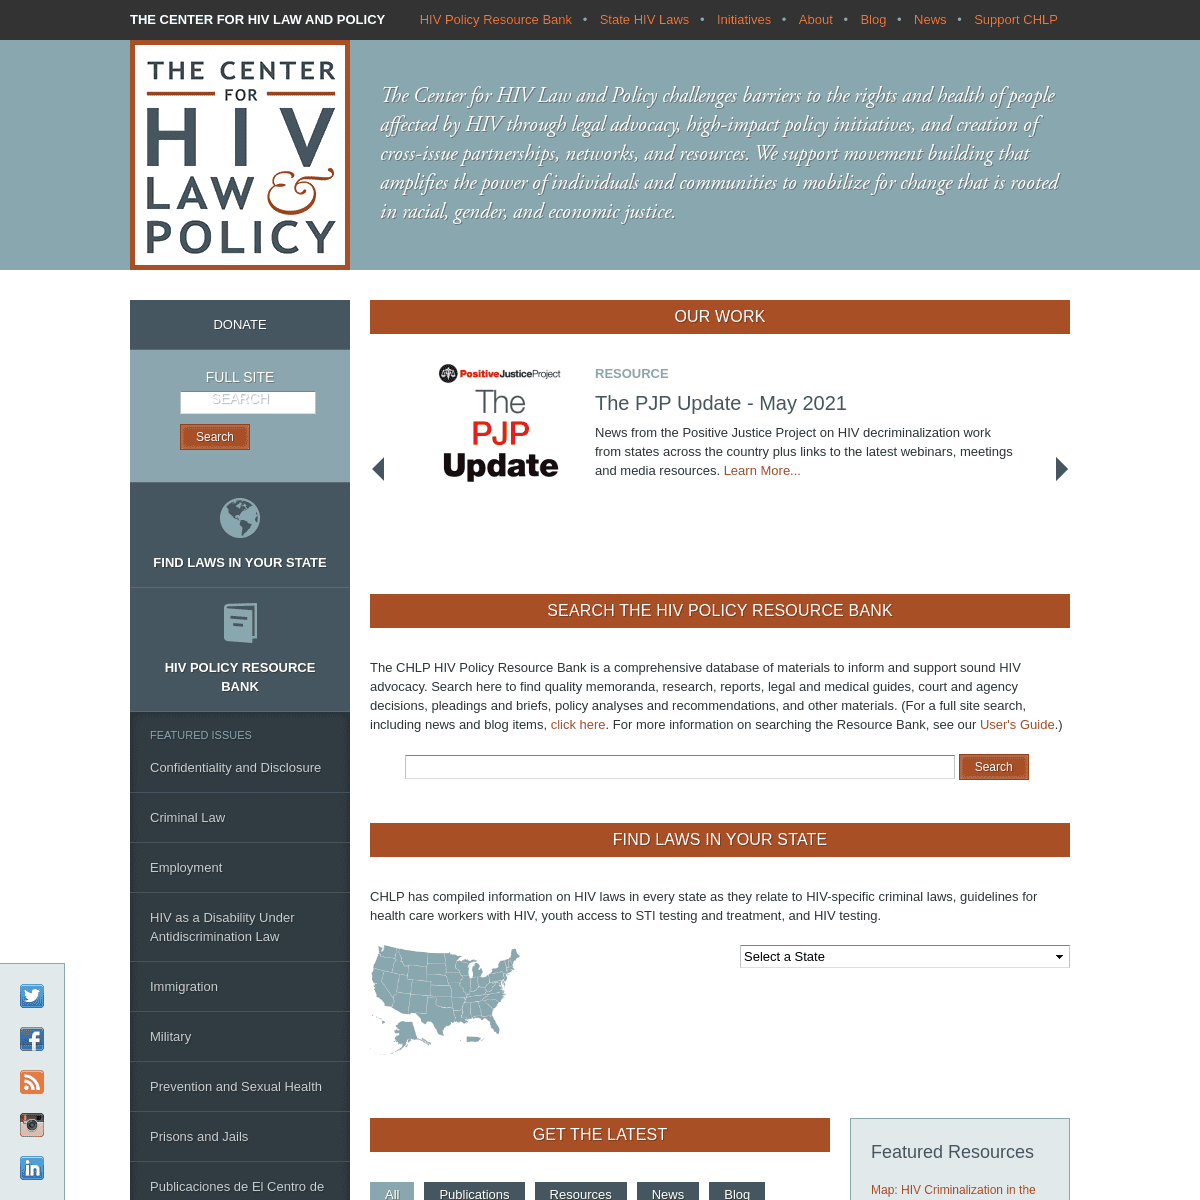 A complete backup of https://hivlawandpolicy.org